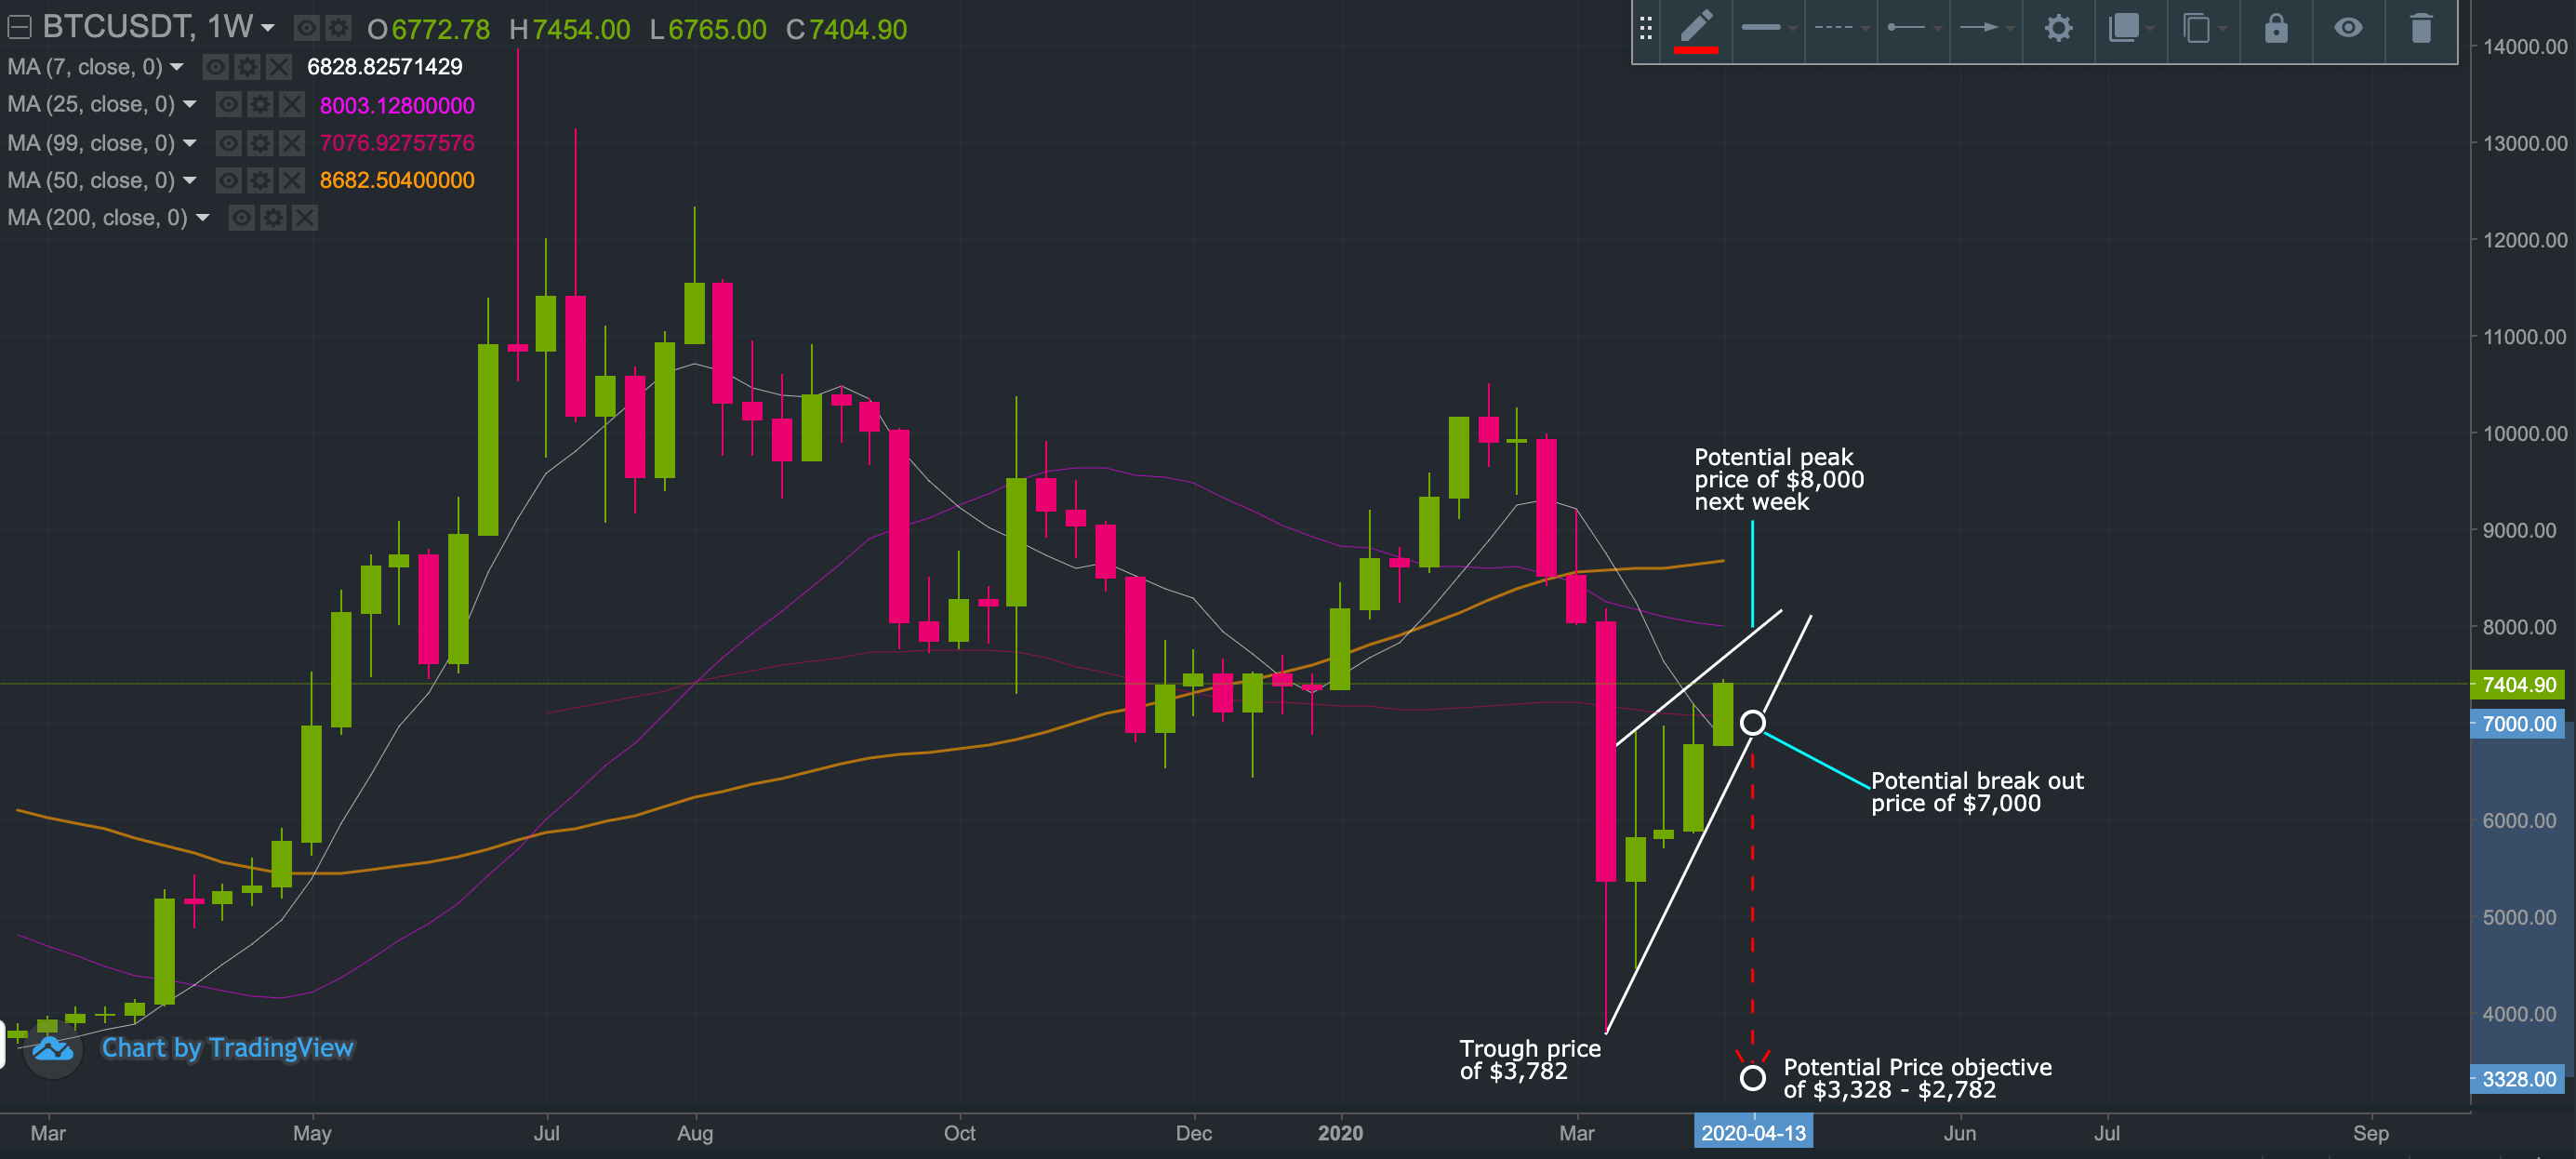 Bitcoin rising wedge: measuring potential price objectives